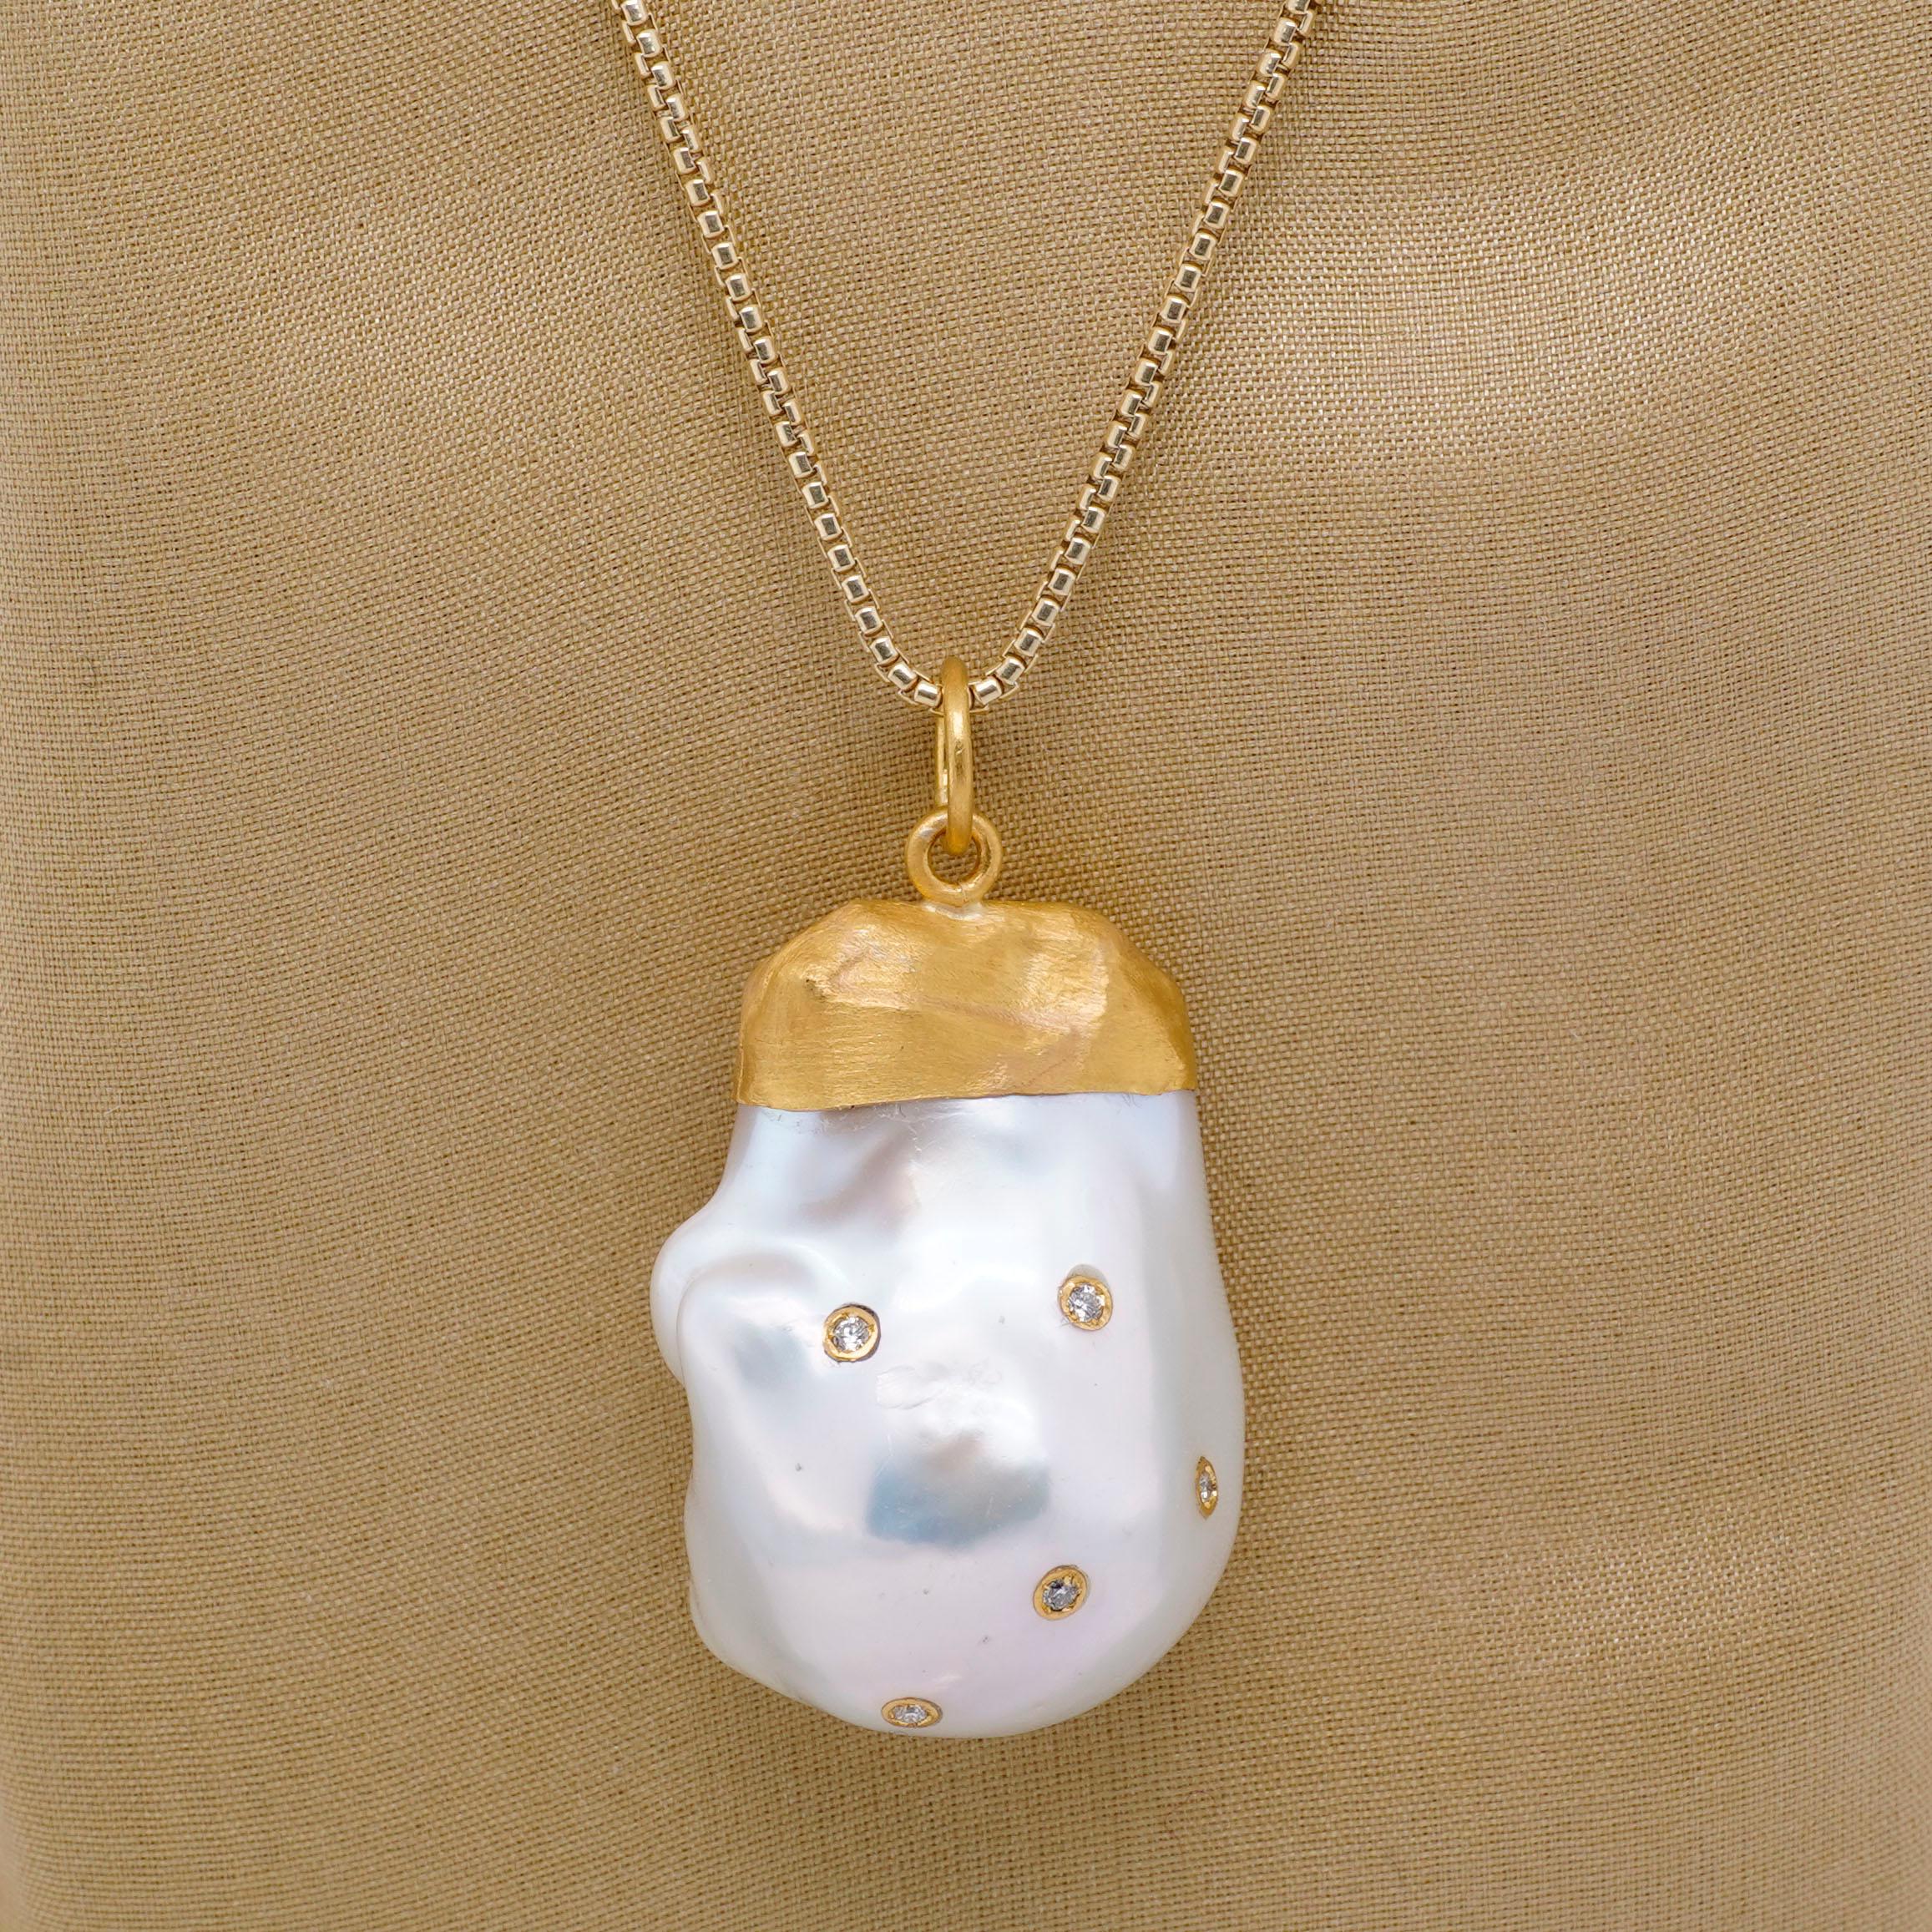 Large, 53.70ct Baroque Pearl Pendant Necklace with Inlaid Diamonds, 24kt Gold In New Condition For Sale In Bozeman, MT